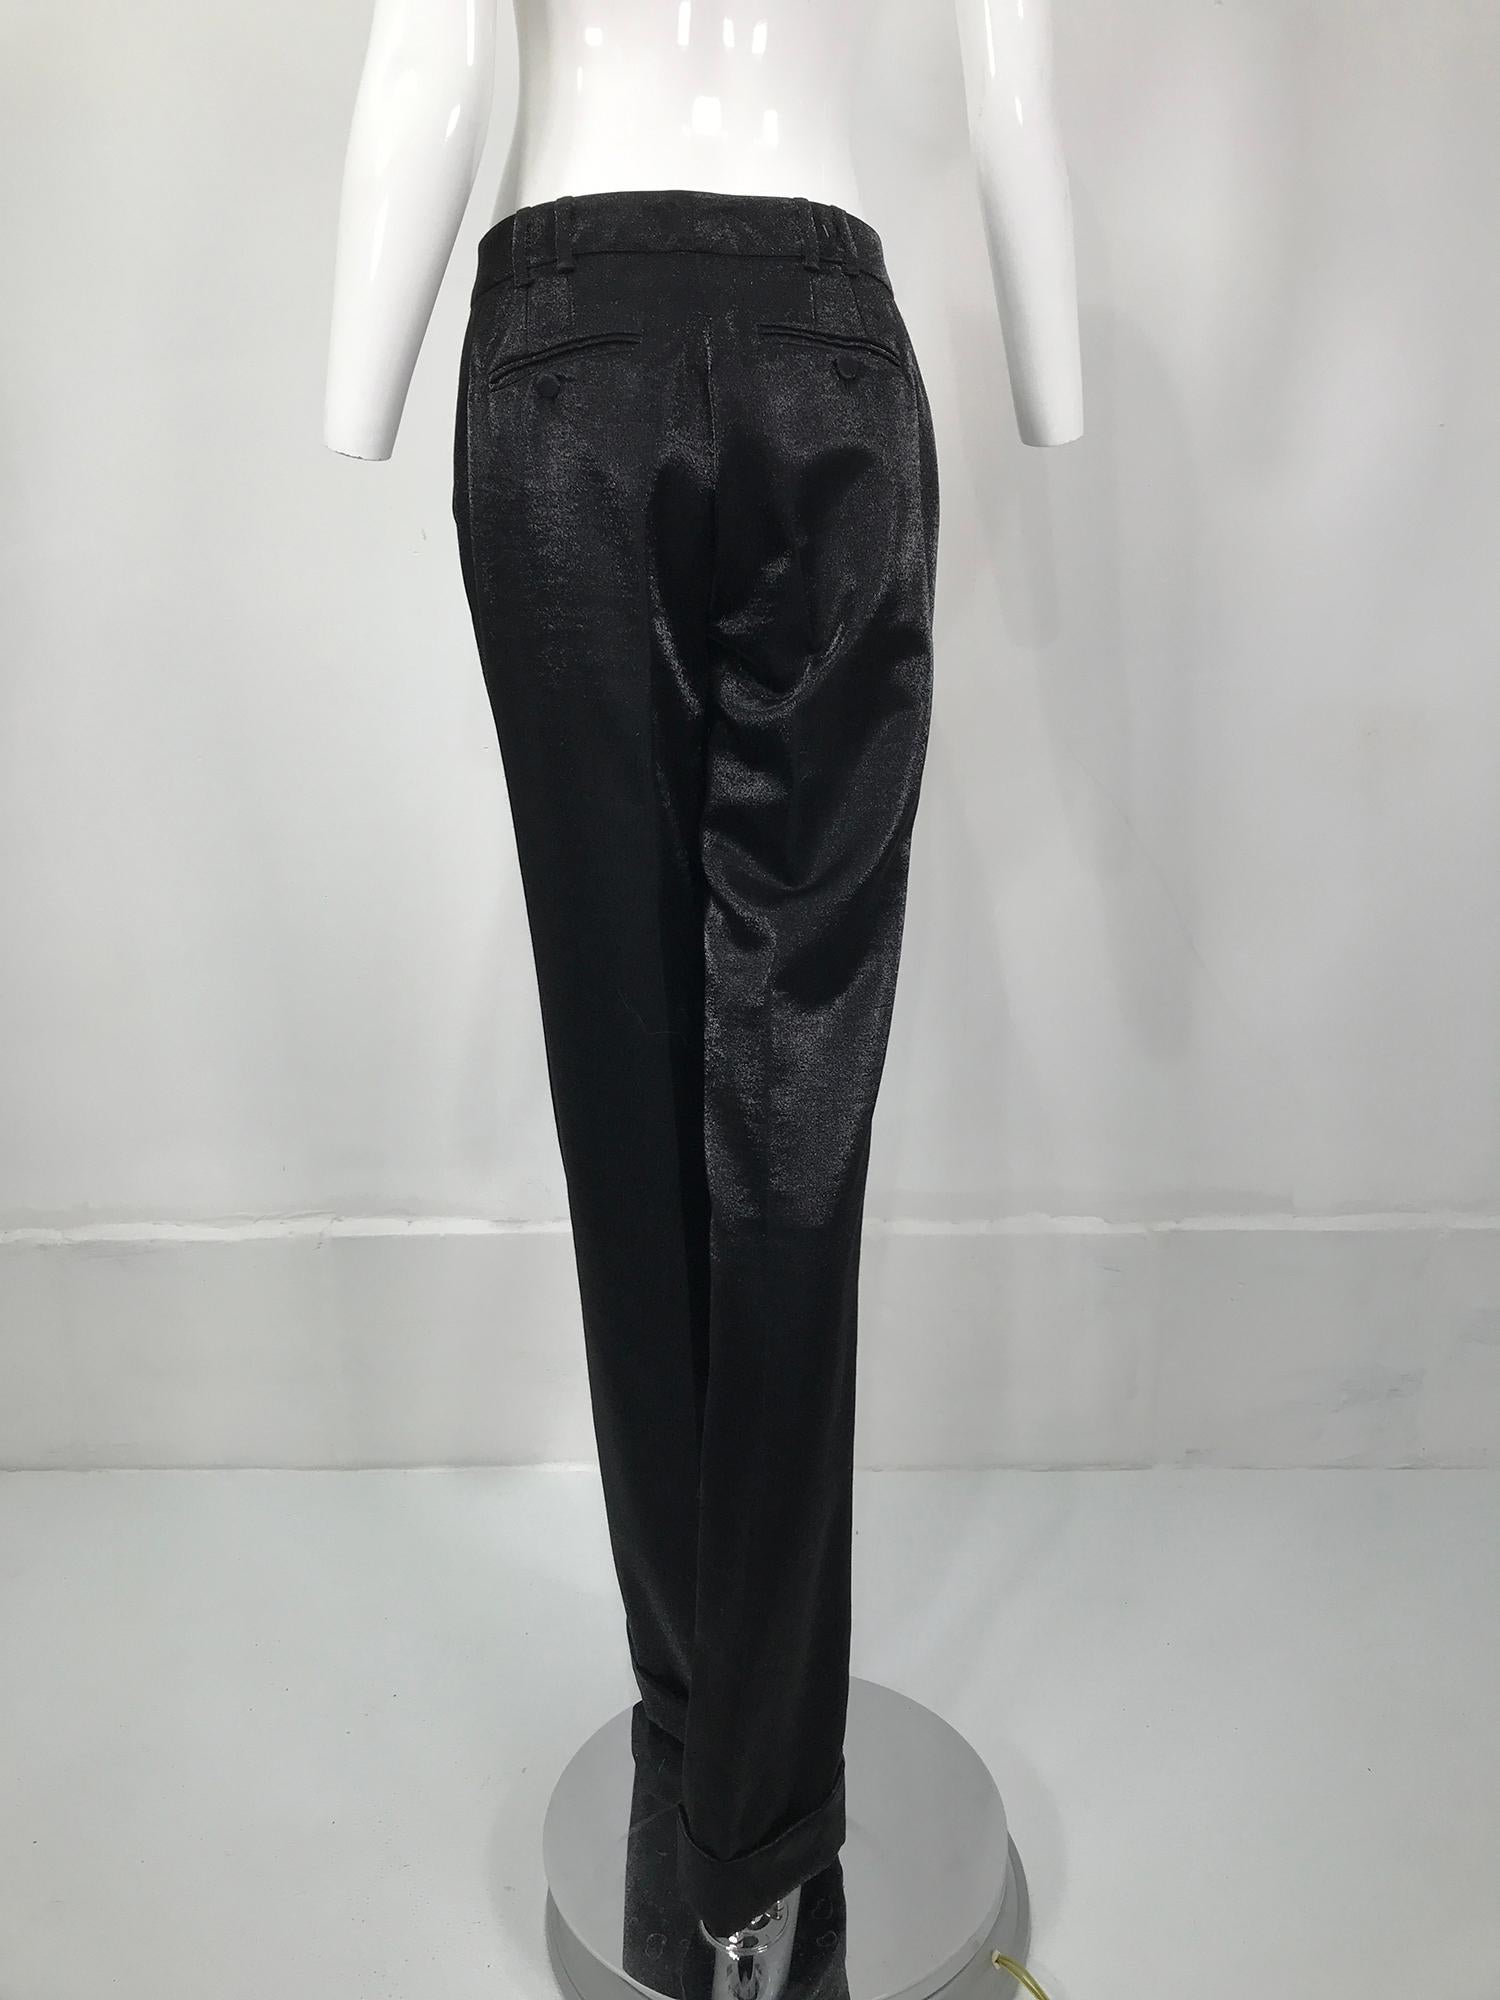 Gucci Shimmery Black Wide Leg Cuffed Trouser 40 In Excellent Condition For Sale In West Palm Beach, FL